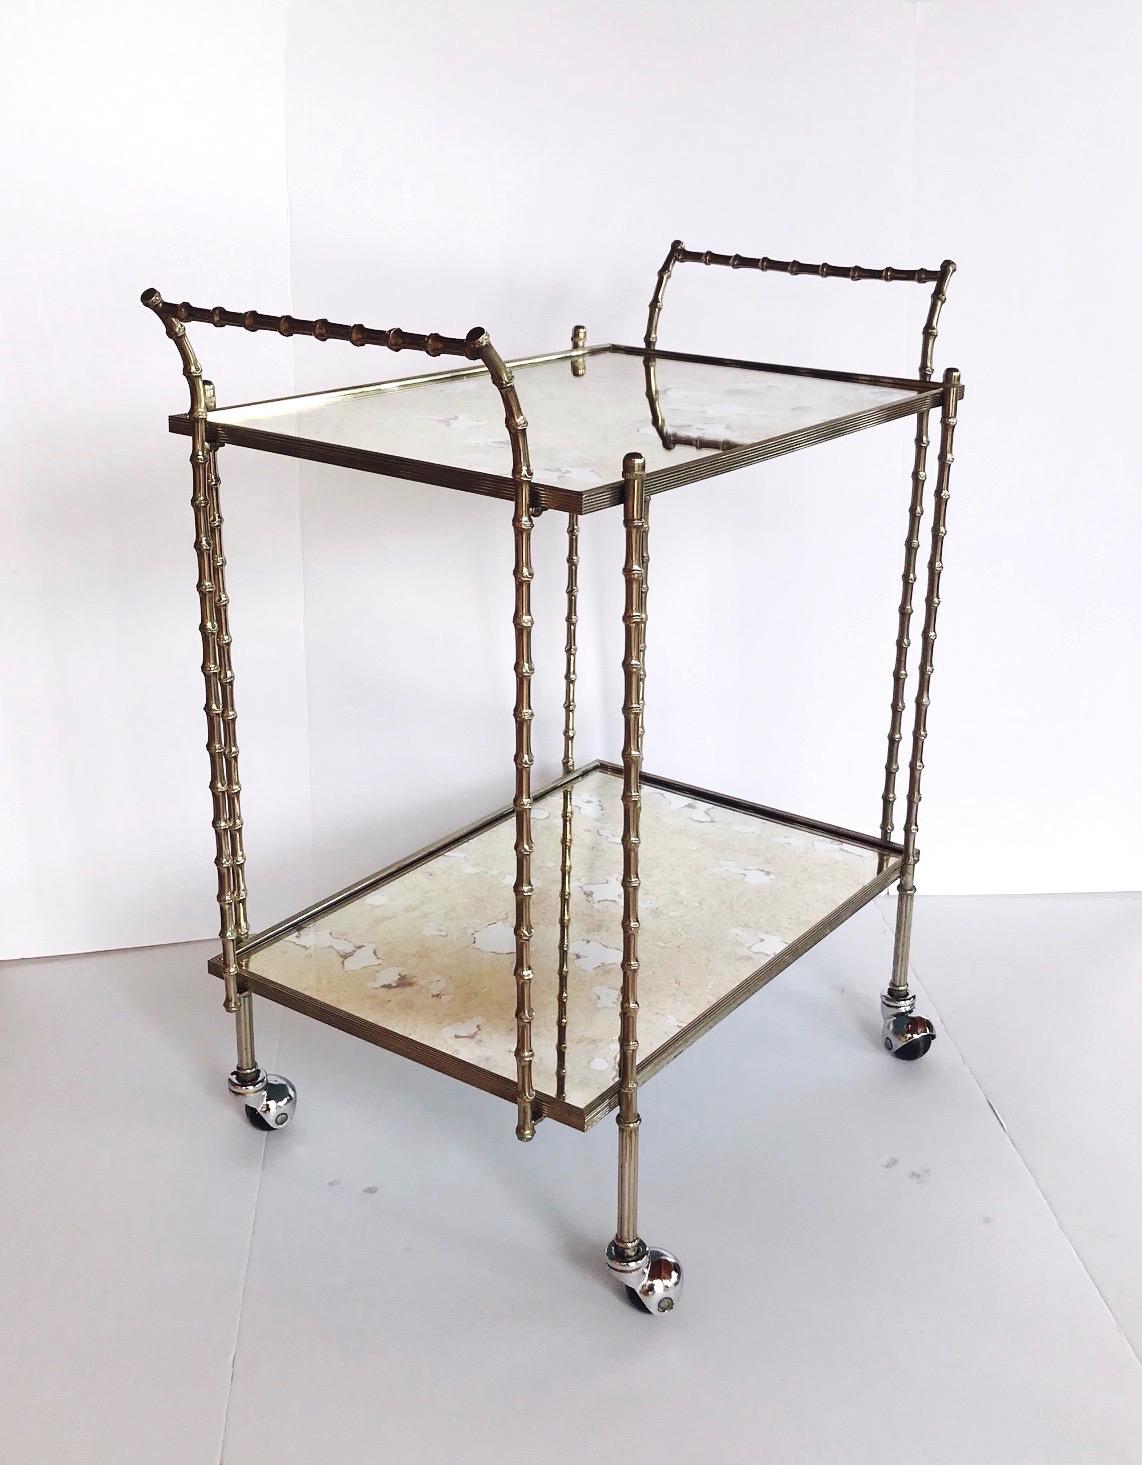 Elegant French Hollywood Regency bar cart with bamboo motif. The trolley has two tier design comprised of silvered or nickel over solid brass metal. Fitted with two mirrored tops with a smokey bronze antique finish. The cart features curved side